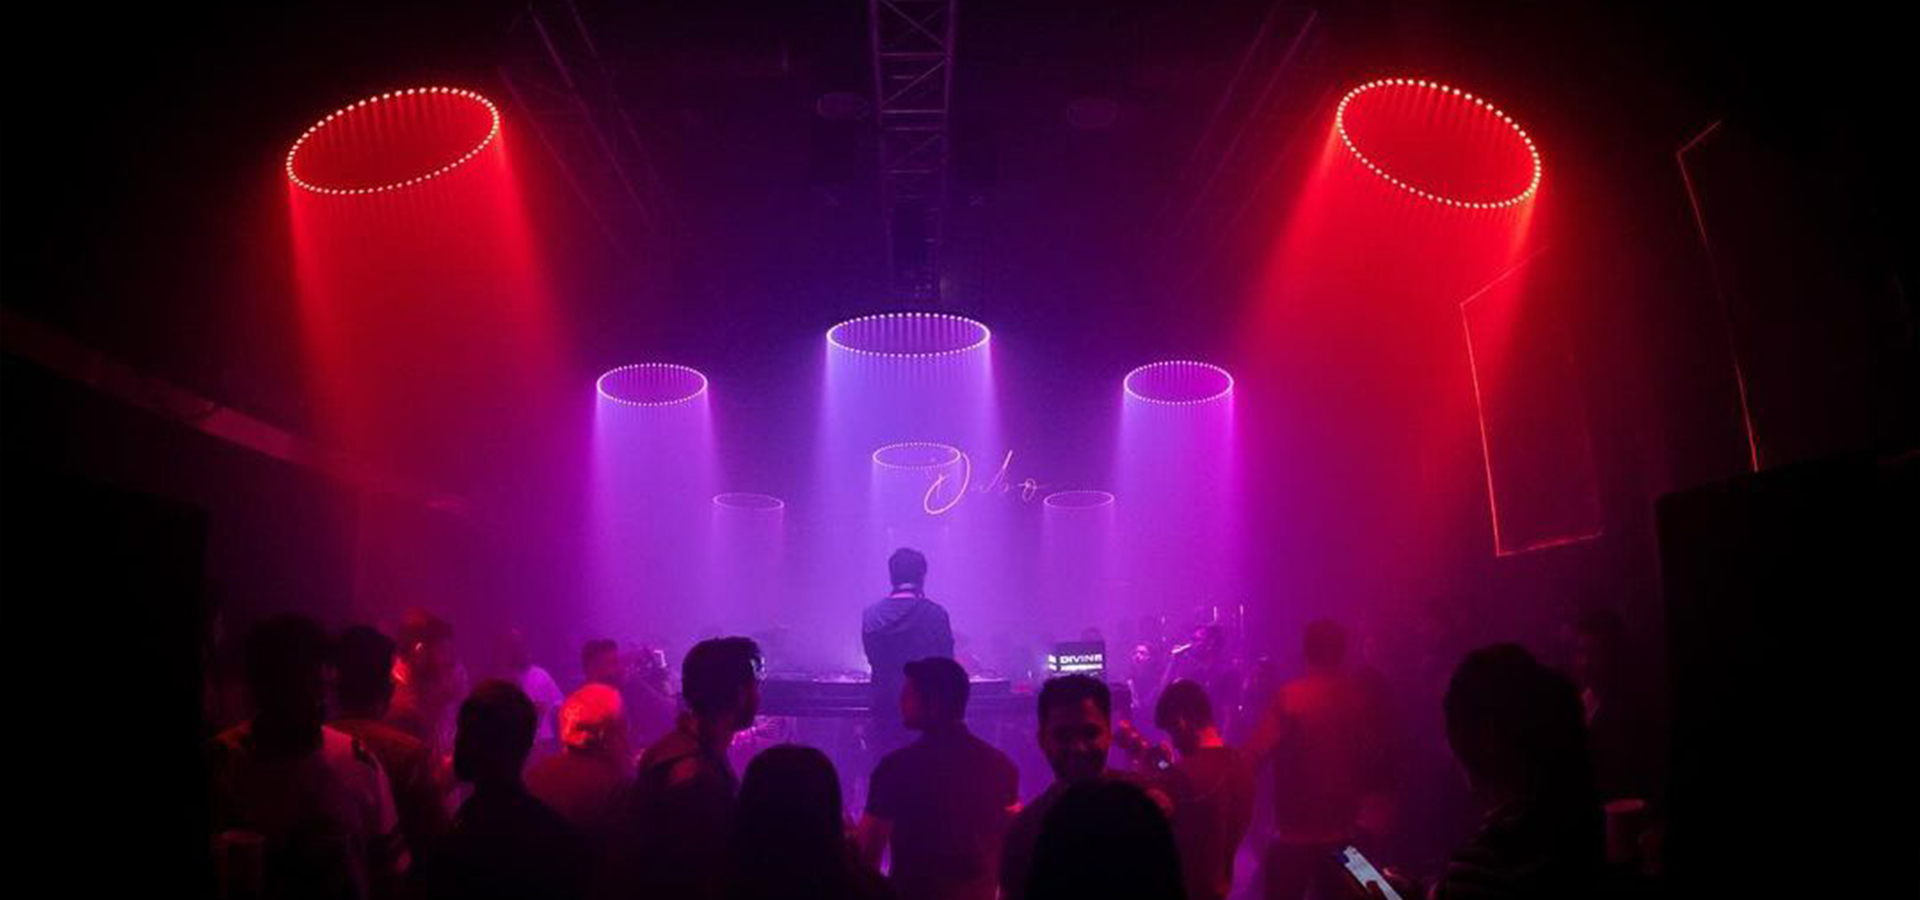 DLB brings the most creative lifting lights to Bullzeye club to create a top bar atmosphere